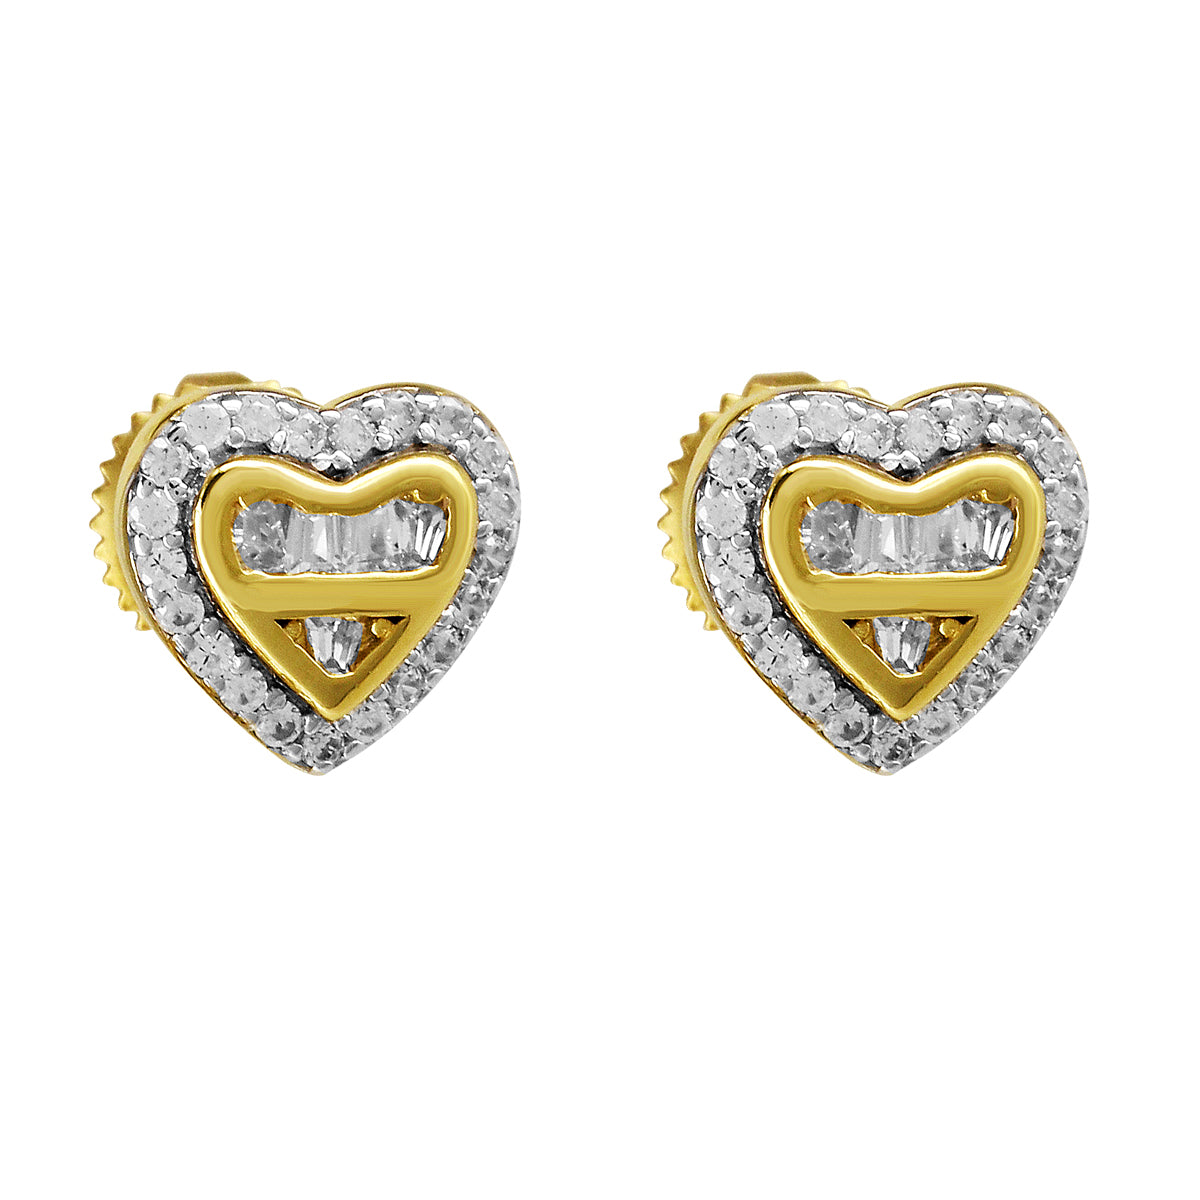 Gold Tone Double Heart Micro Pave .925 Screw Back Earrings